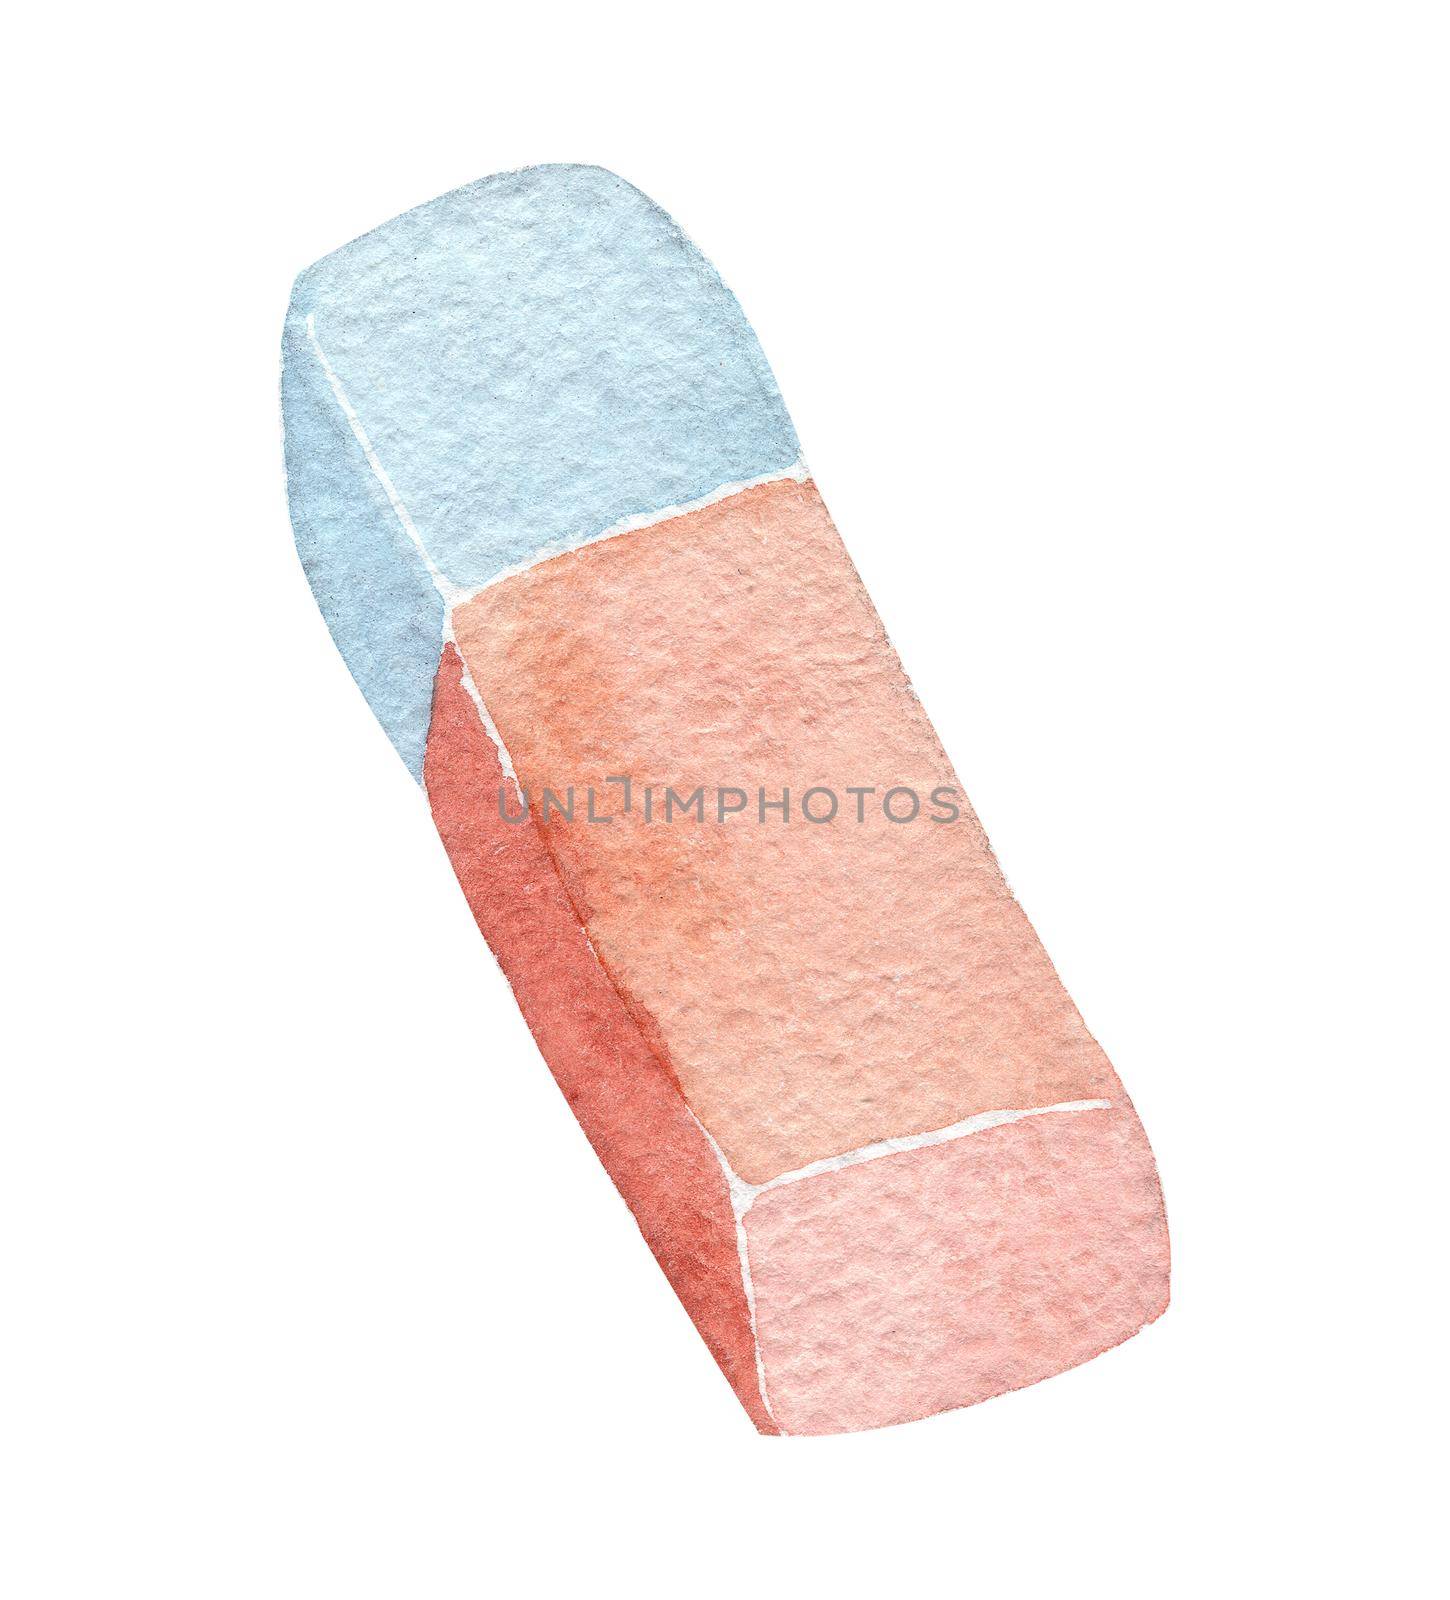 watercolor blue brown eraser stationery isolated on white background by dreamloud